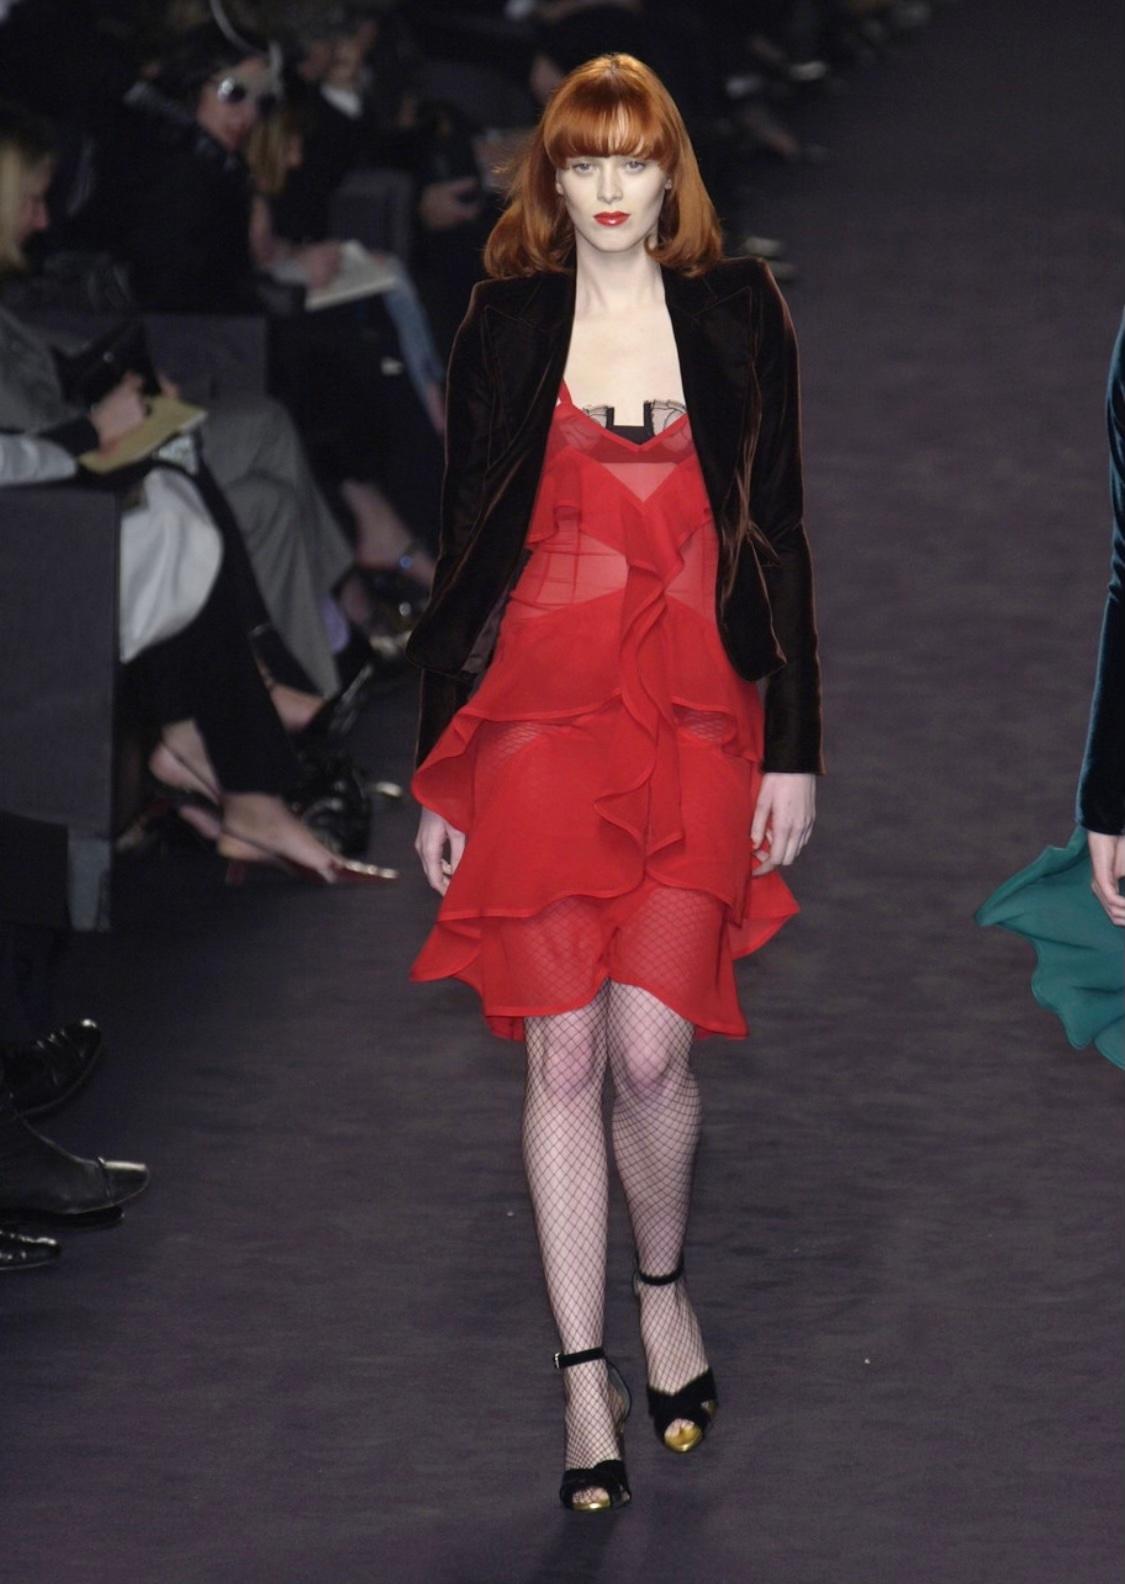 Presenting a bouncy bright red ruffled semi-sheer bodycon skirt designed by Tom Ford for Yves Saint Laurent Rive Gauche's Fall/Winter 2003 collection. The dress version of this skirt debuted on the season's runway as part of look number 2 on Karen